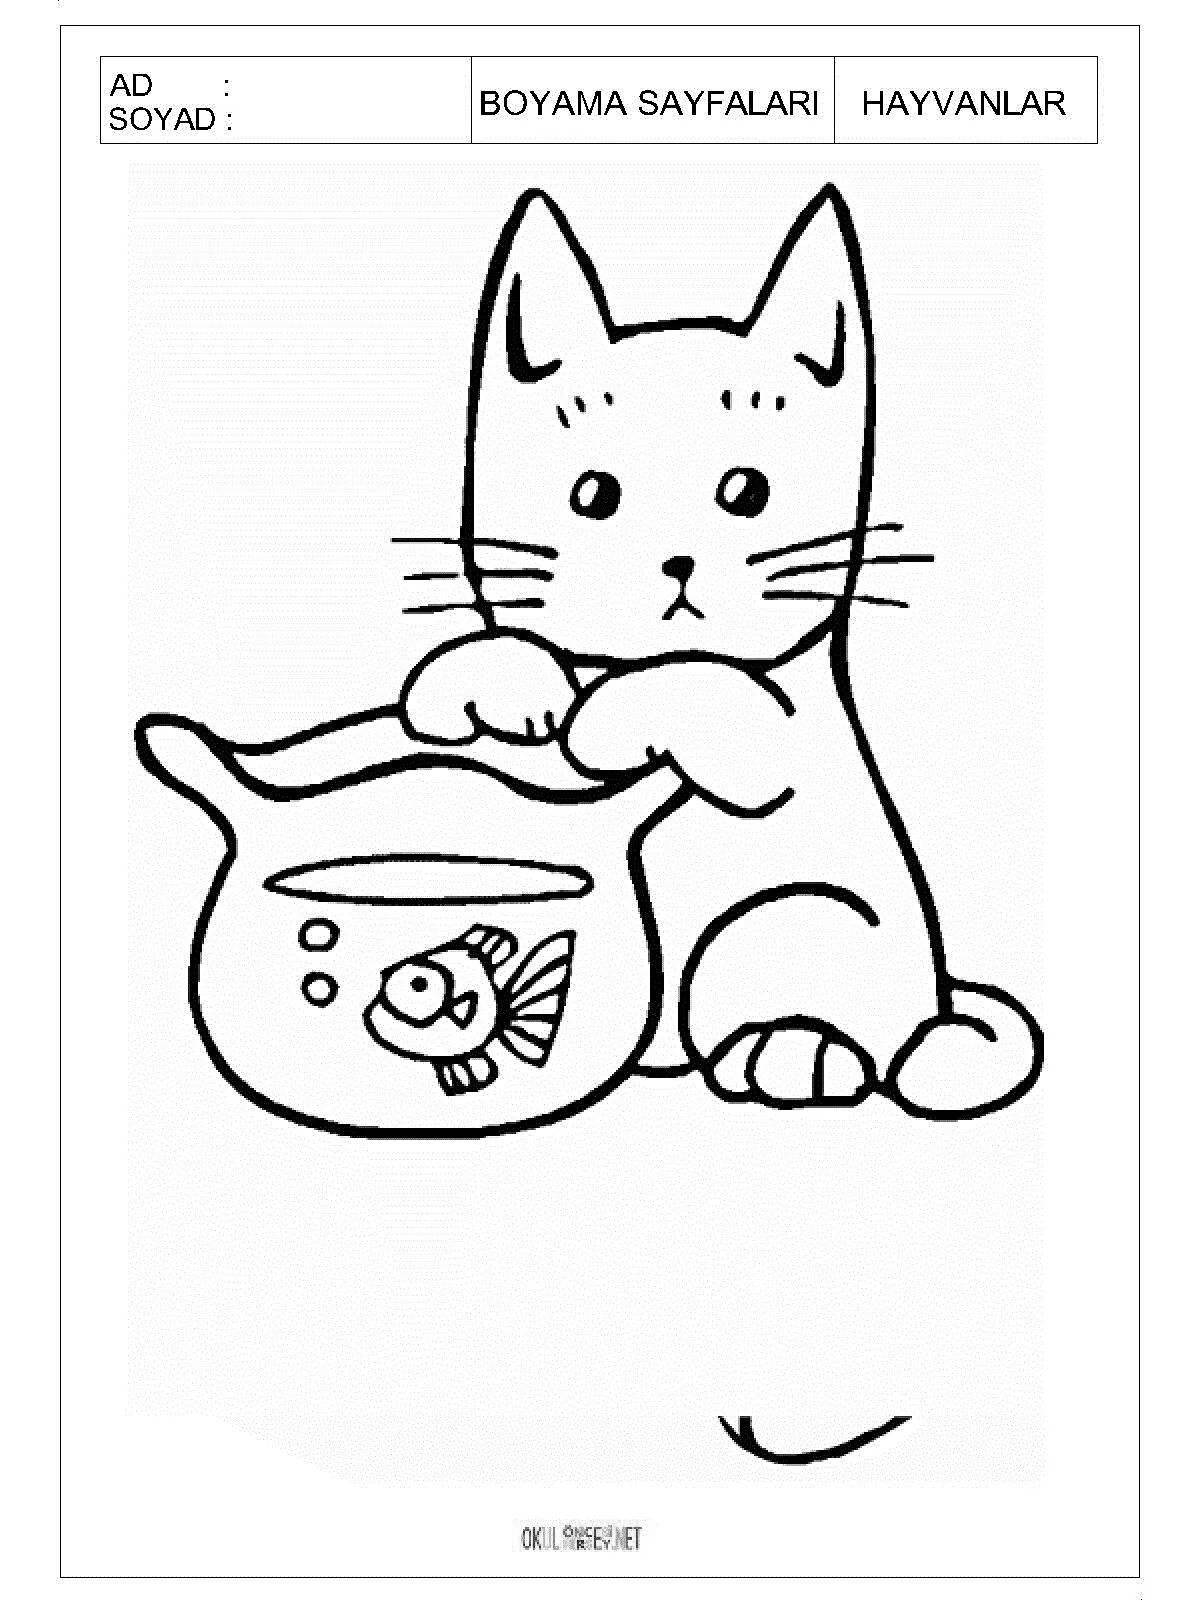 Adorable cat coloring page